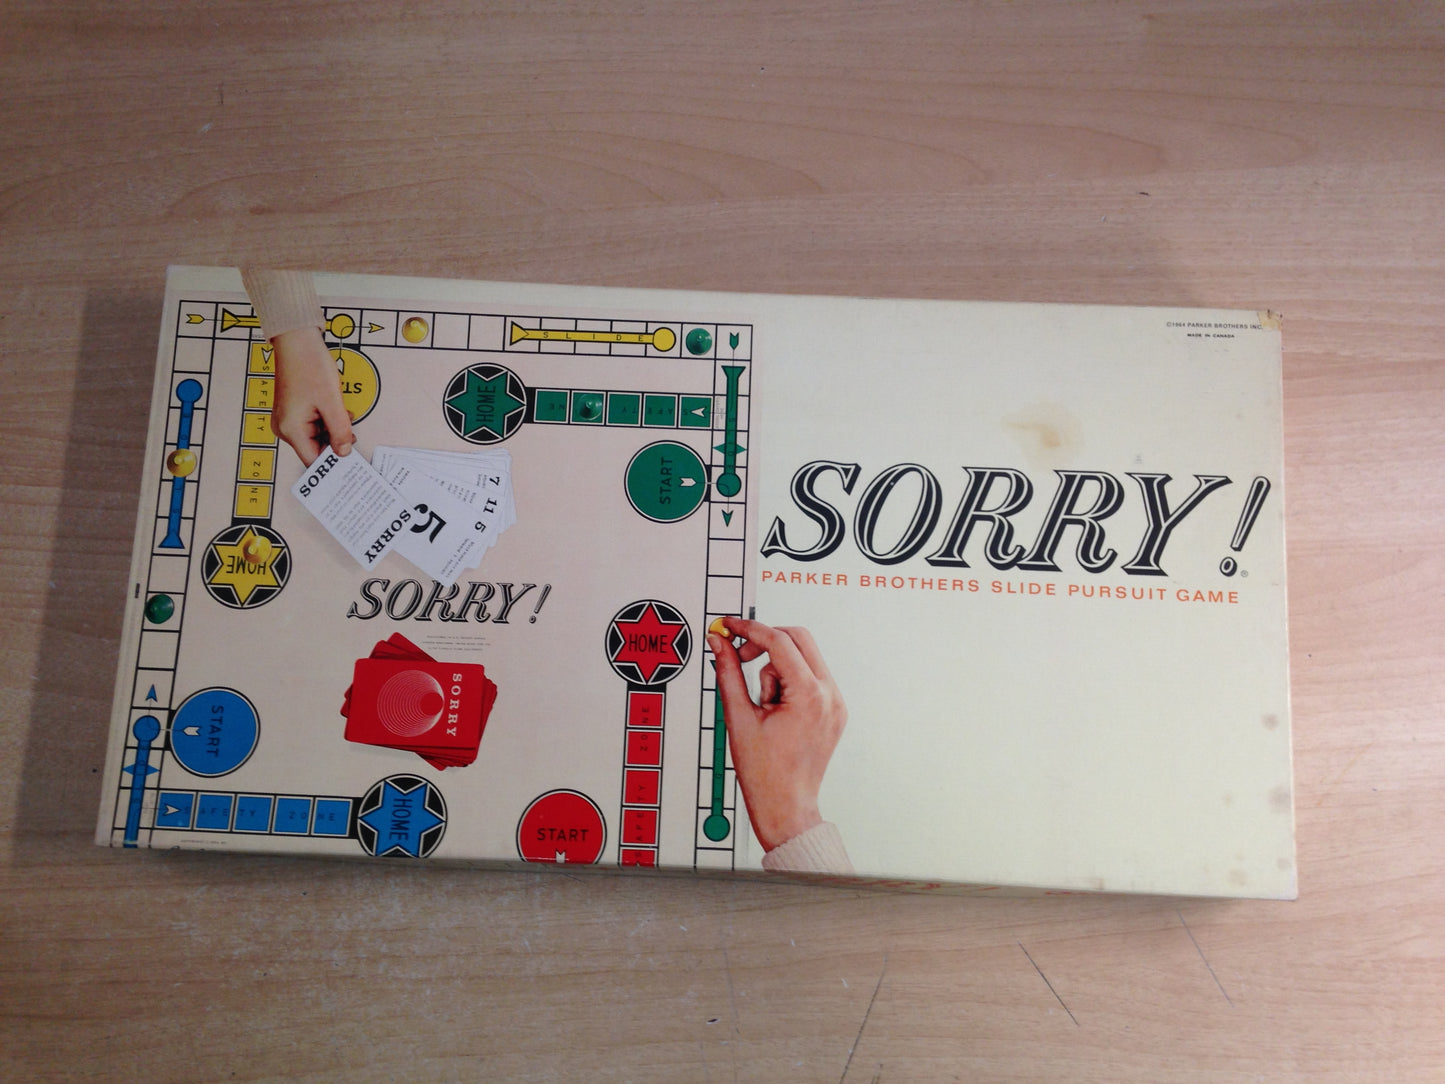 Y Game Sorry Vintage 1964 As New Complete Excellent Condition